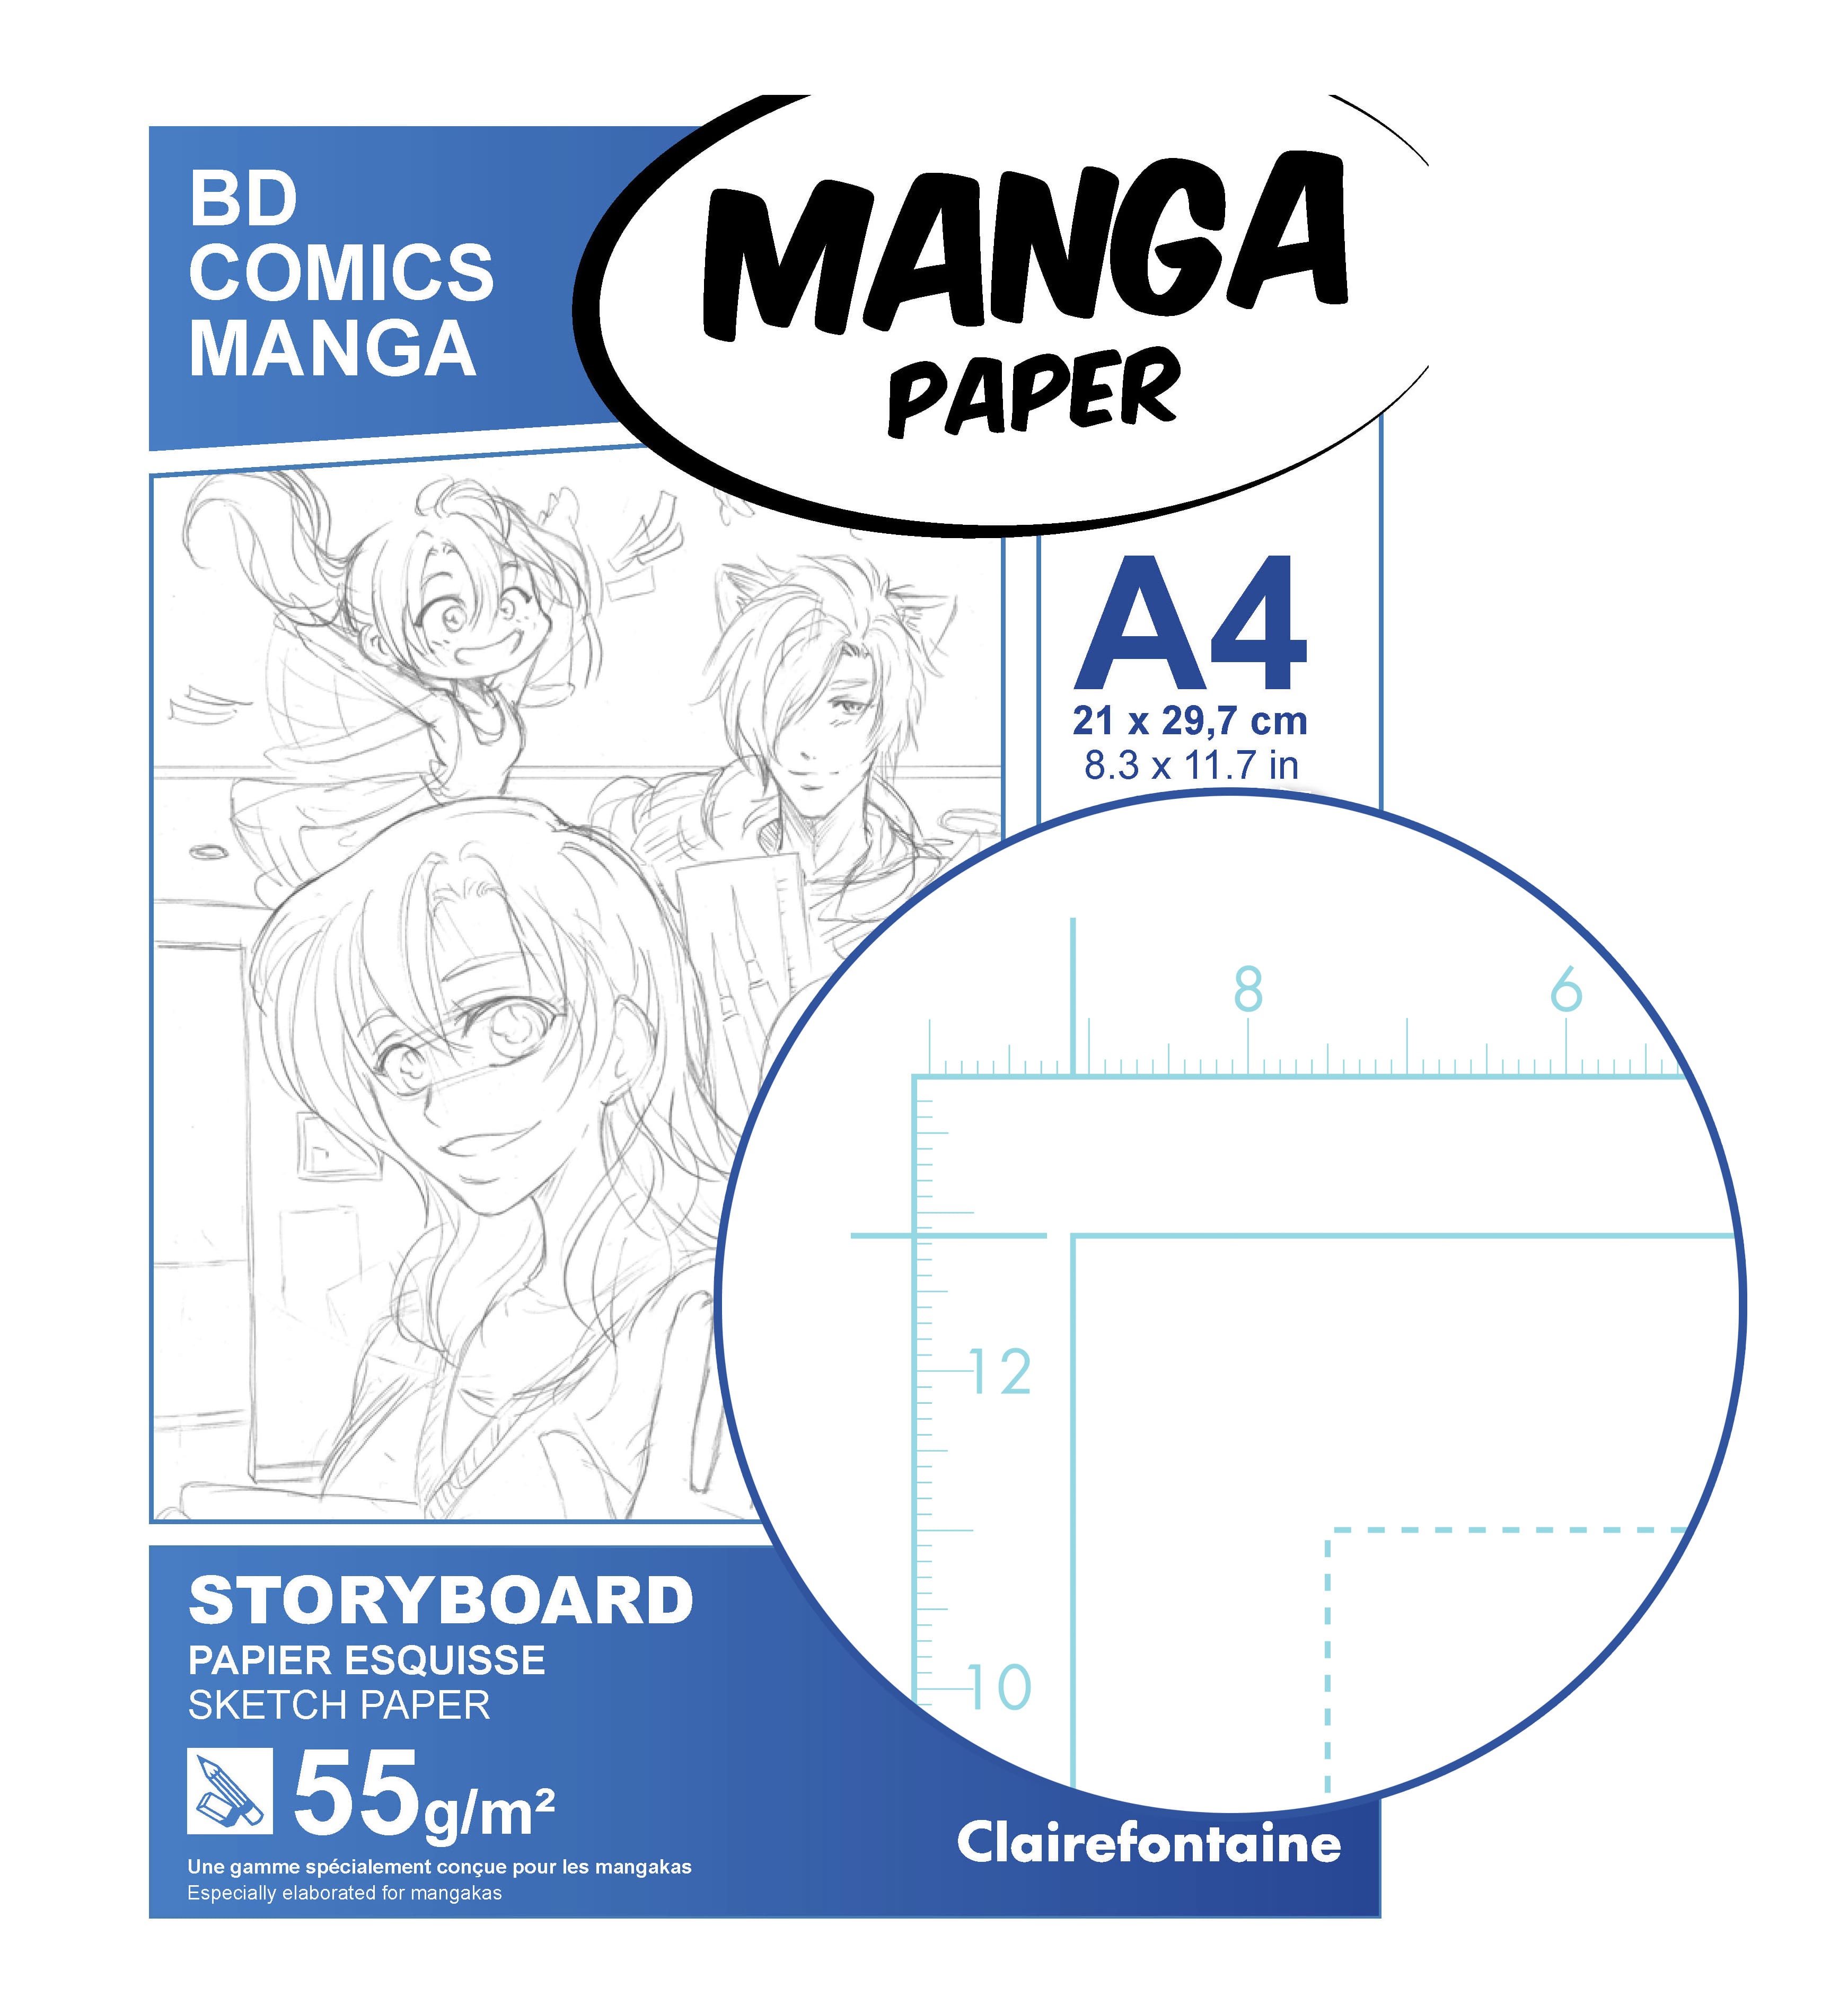 clairefontaine manga paper storyboard